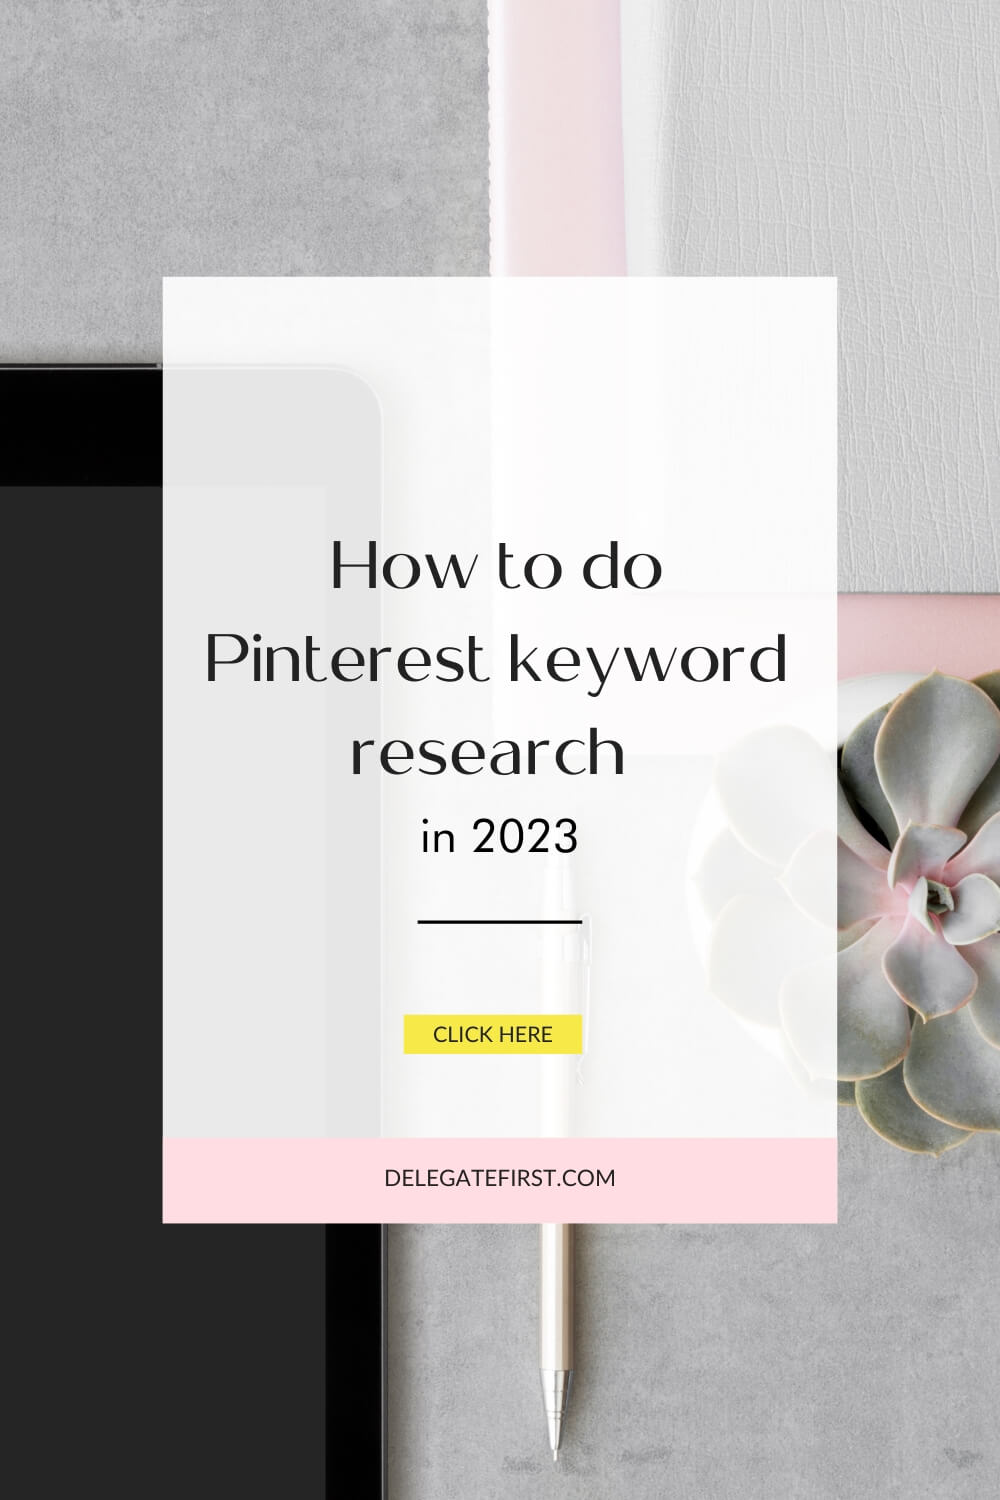 How to do Pinterest keyword research in 2023